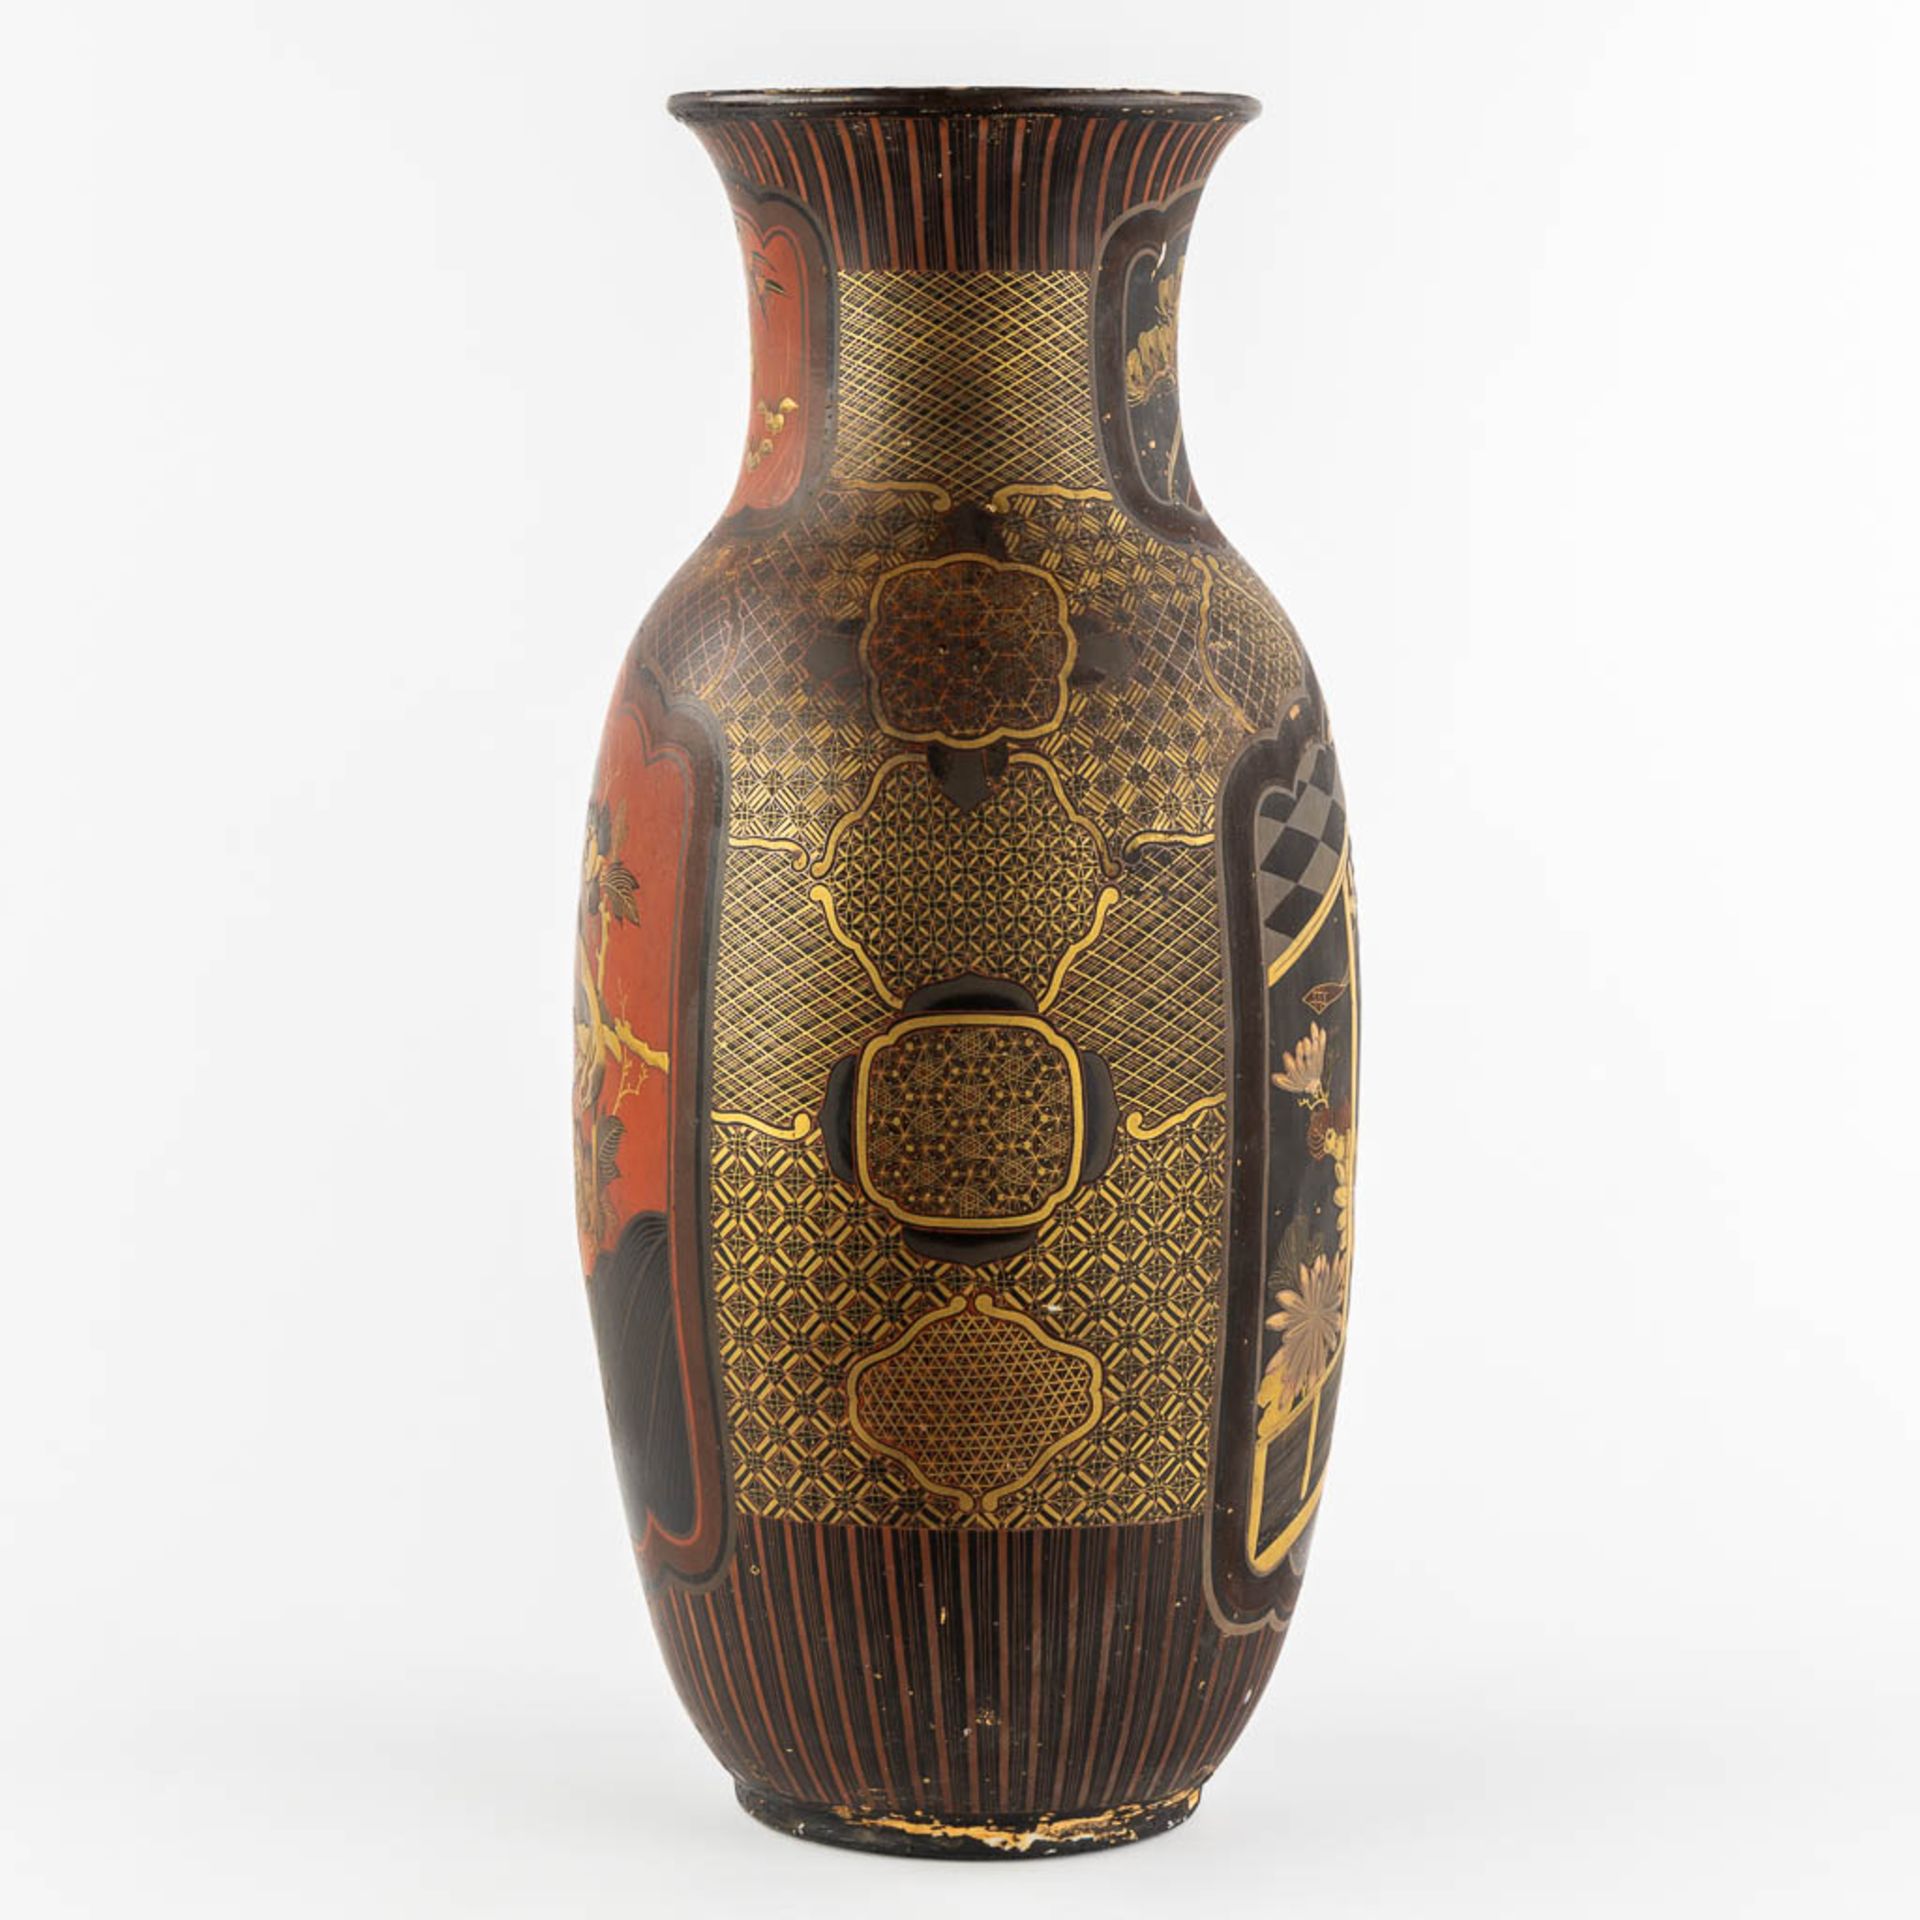 A Japanese porcelain vase, finished with red and gold lacquer. Meij period. (H:61 x D:27 cm) - Bild 6 aus 14